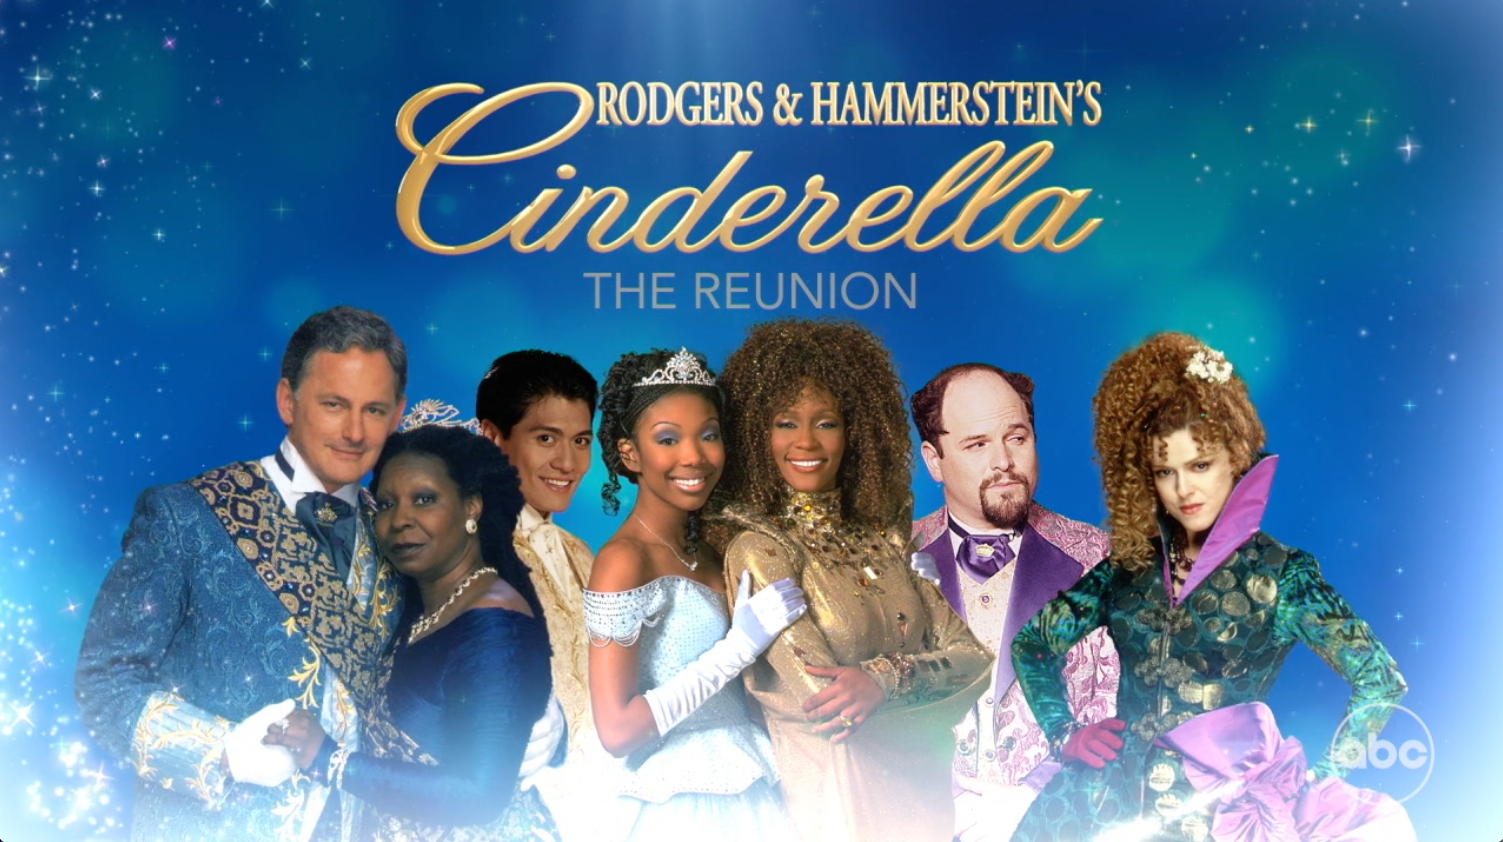 Featured image for “1997 TV Cinderella, Starring Brandy, Sets 25th Anniversary Reunion Special on 20/20”